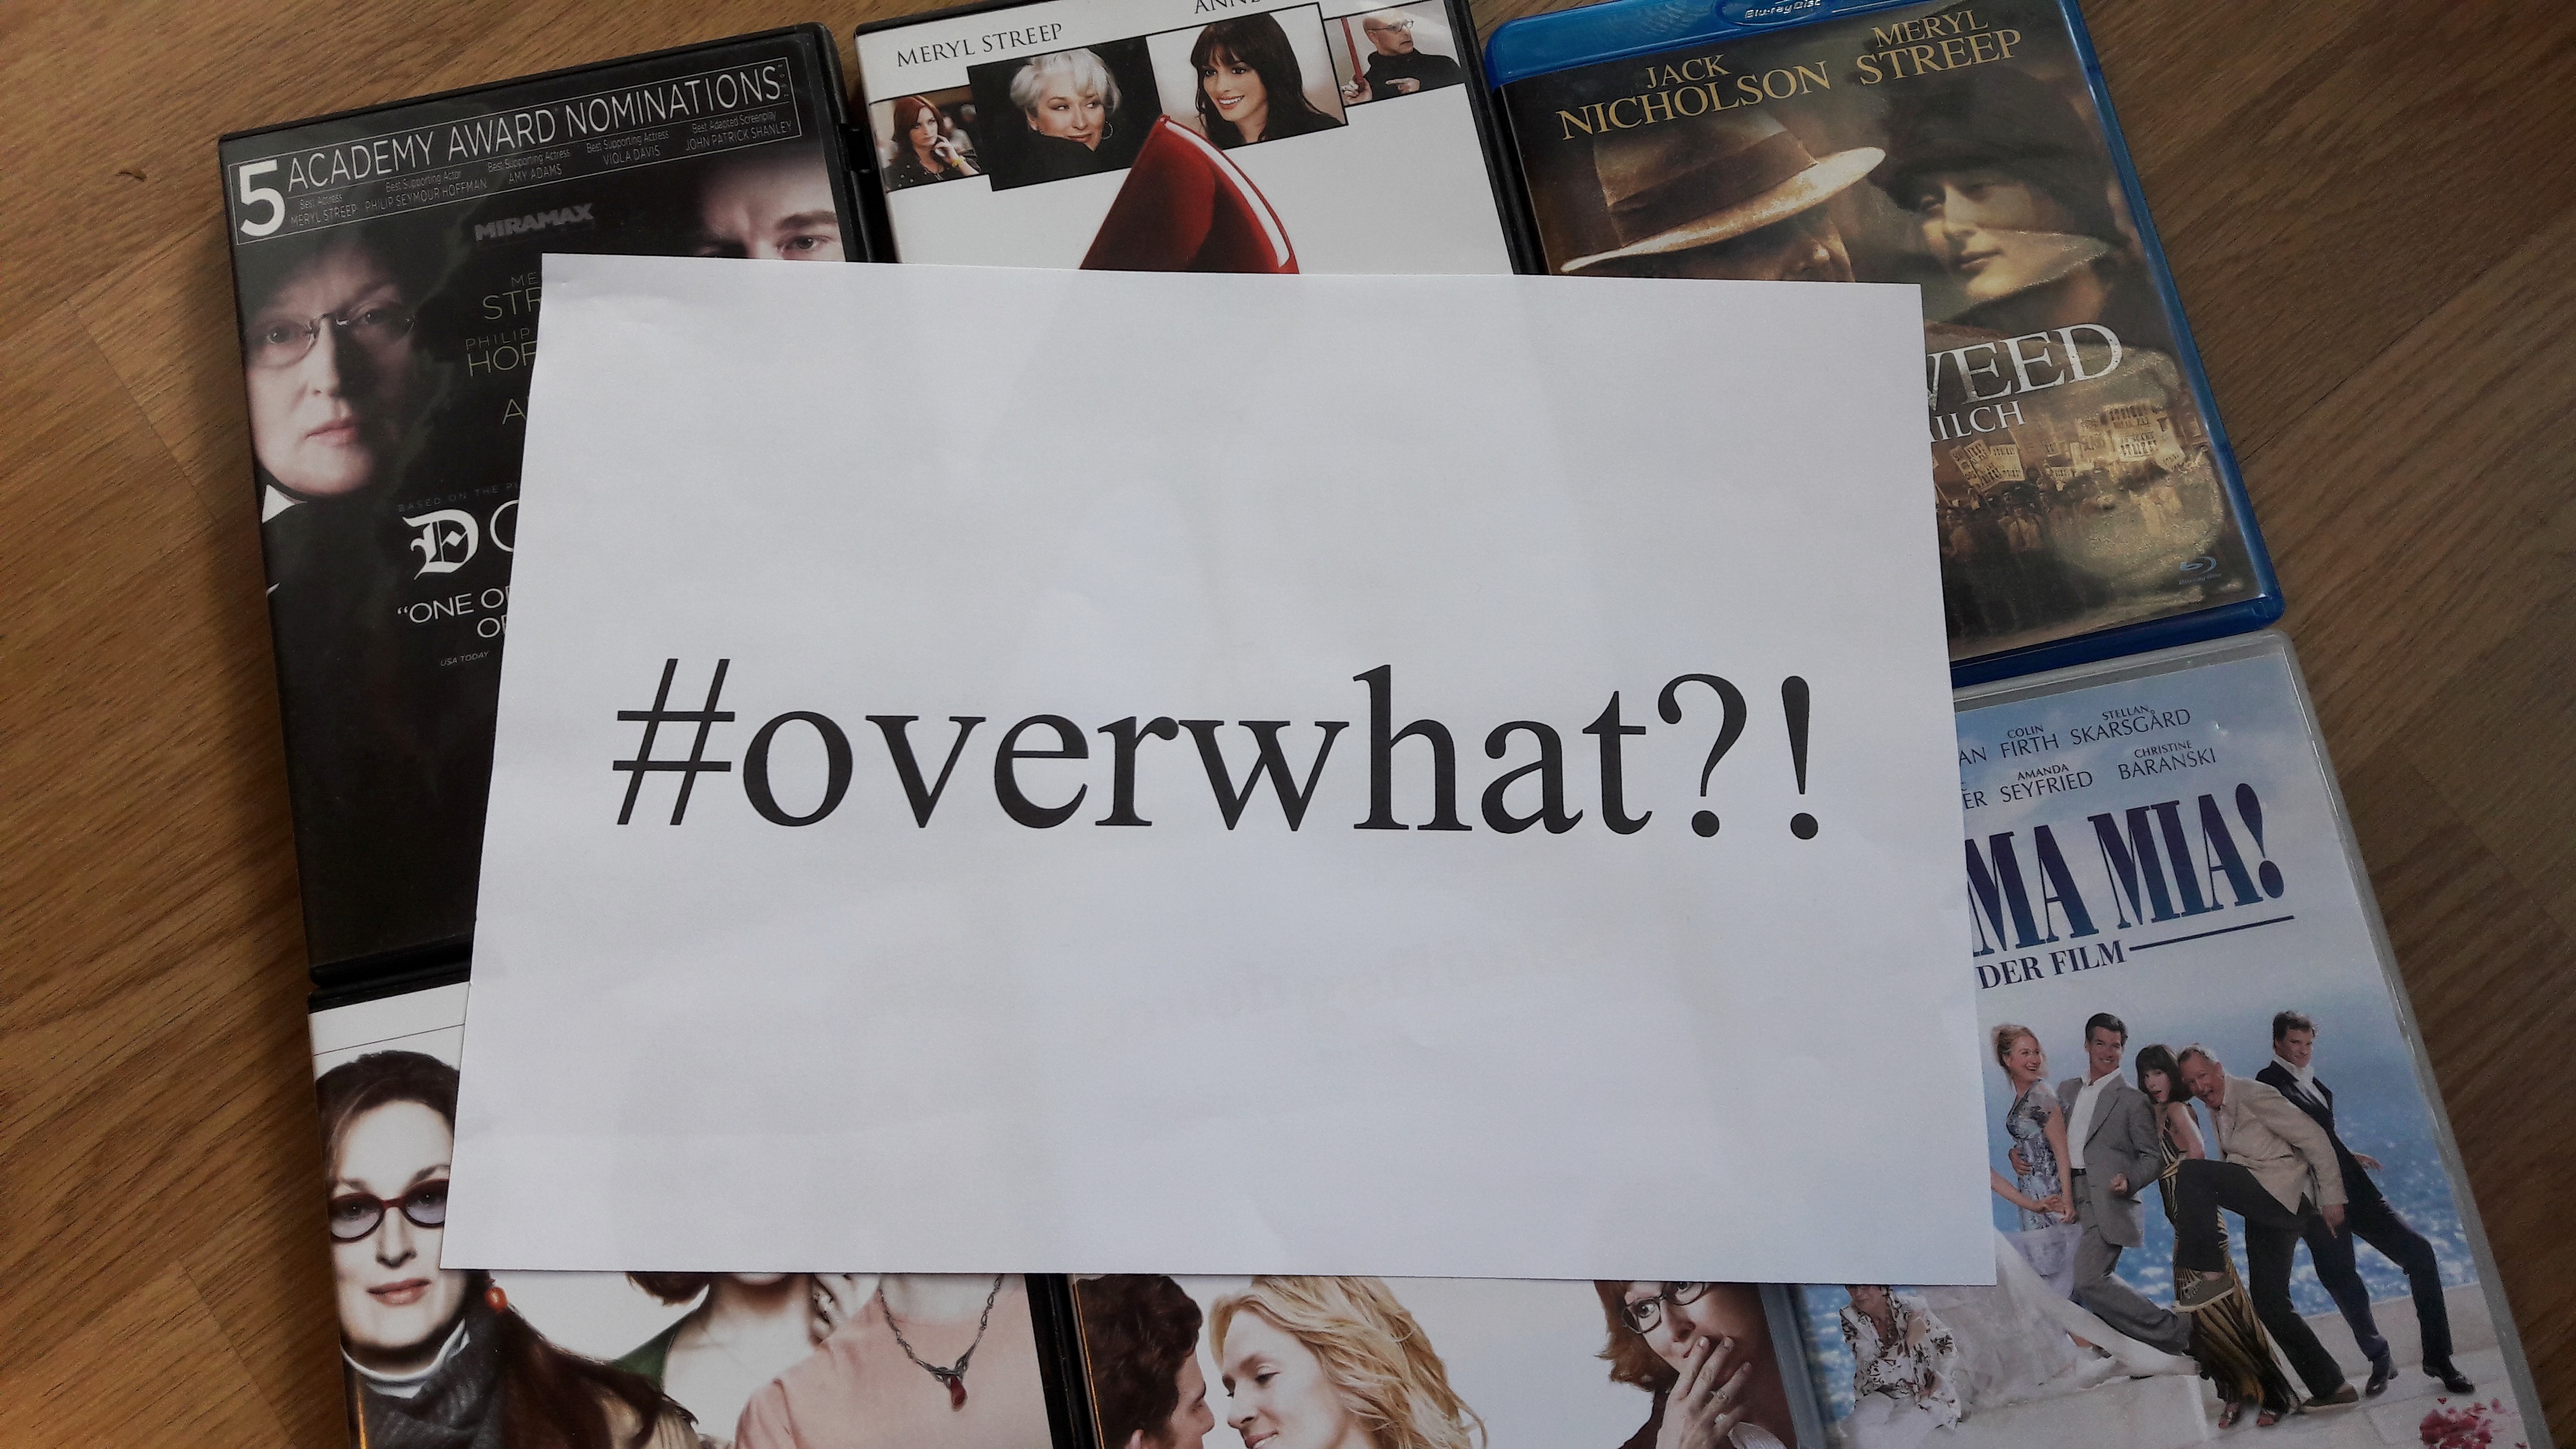 Meryl-Streep-Special: #overwhat?!